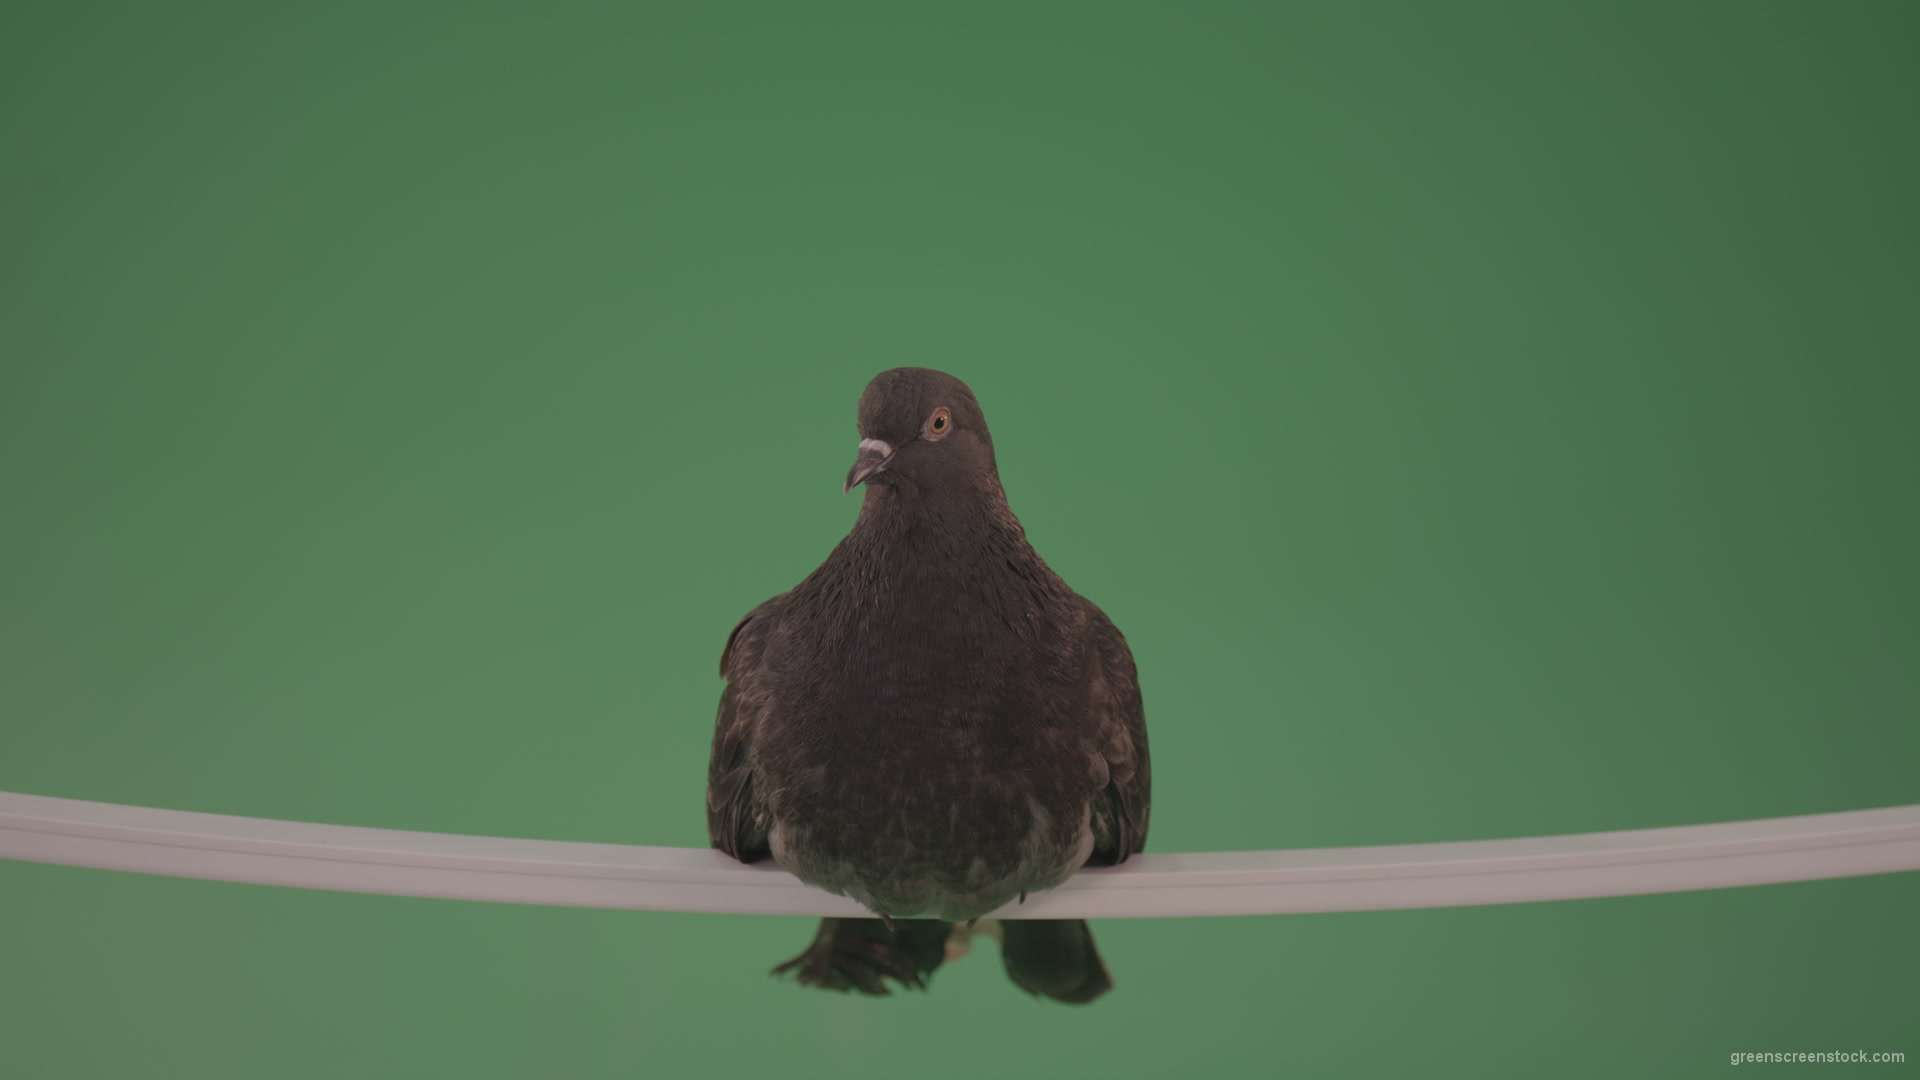 Gray-wild-bird-doves-sitting-on-a-branch-in-the-city-isolated-in-green-screen-studio_008 Green Screen Stock